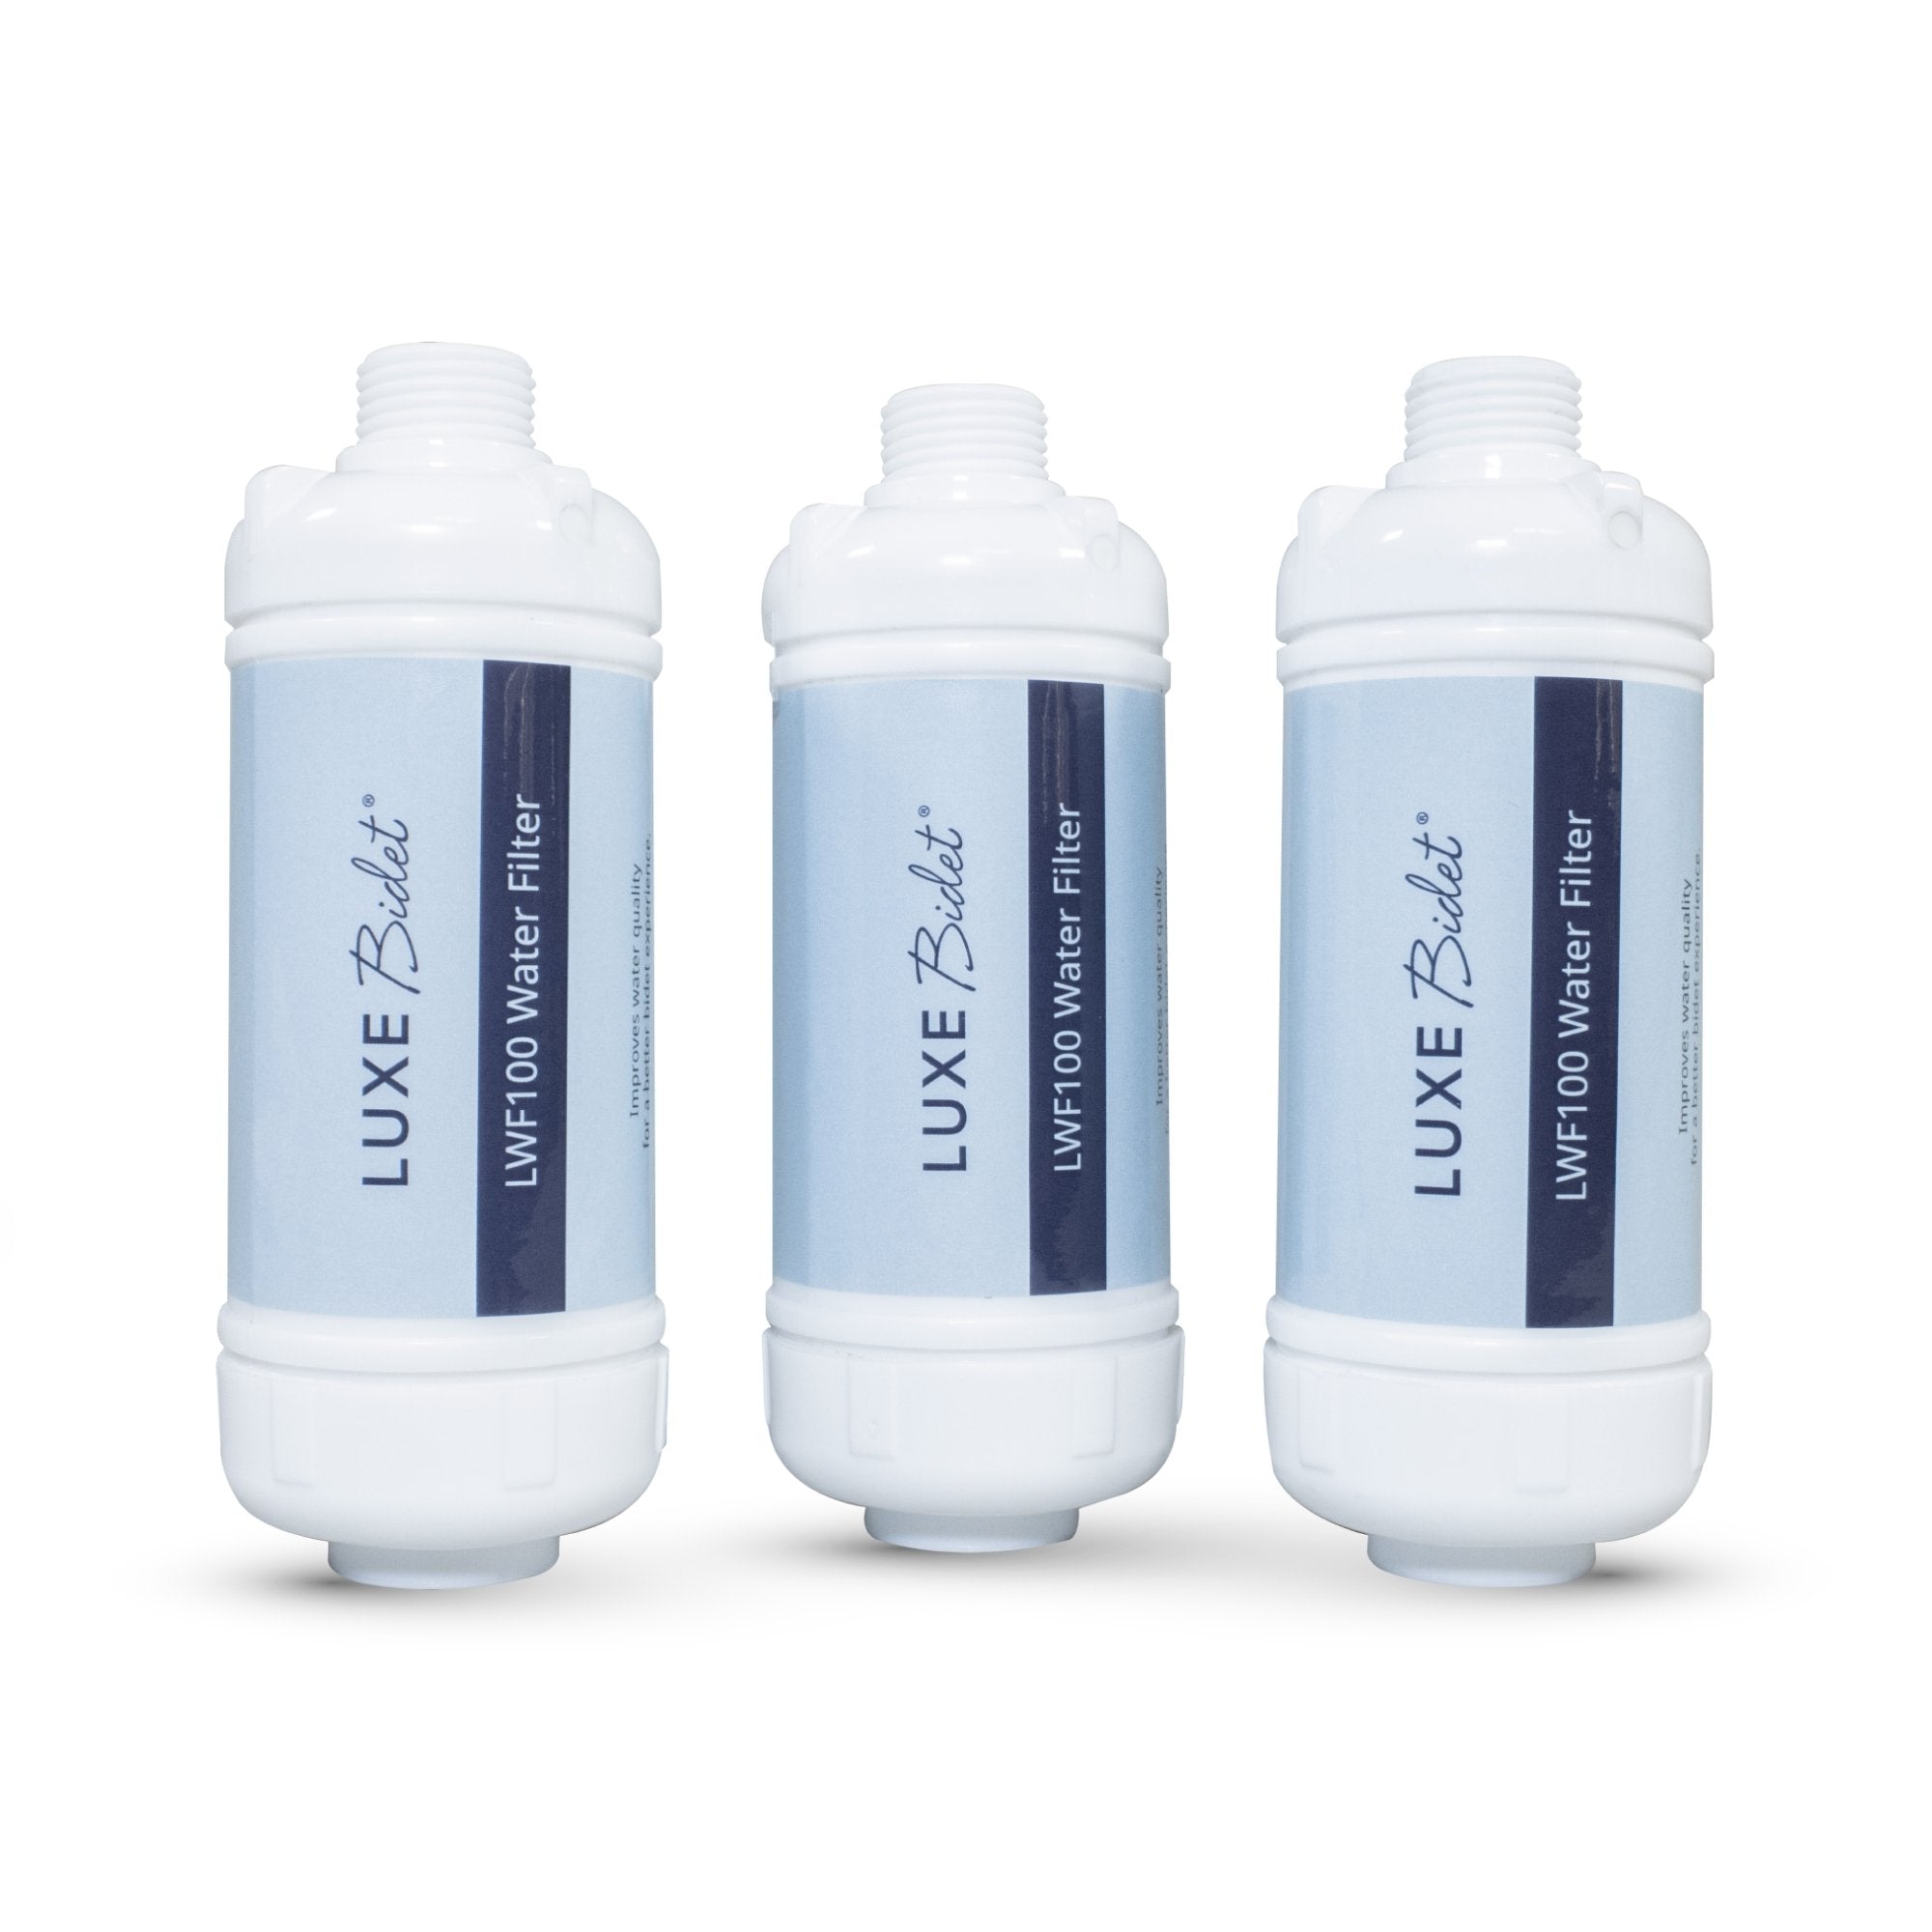 LUXE Bidet 4-in-1 Filtration Water Filter, 3-Pack